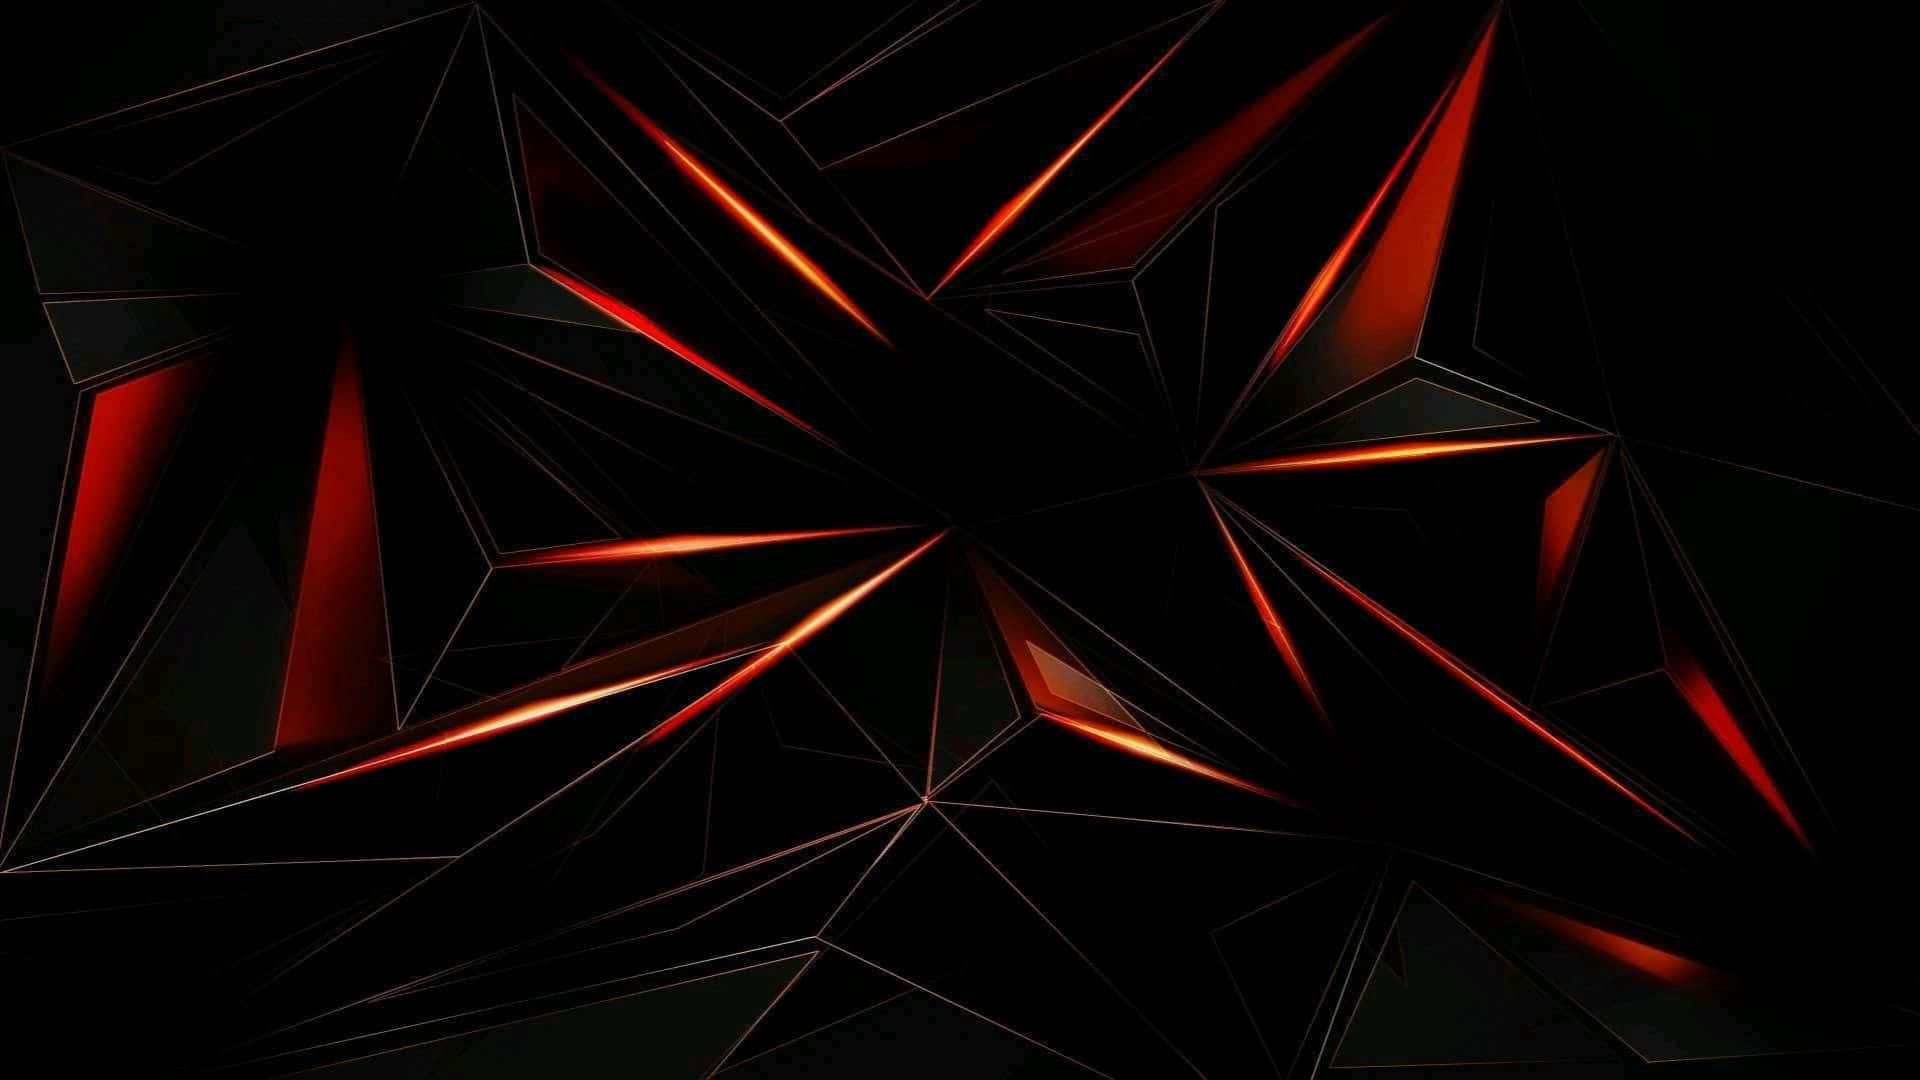 A Black Background With Red And Orange Triangles